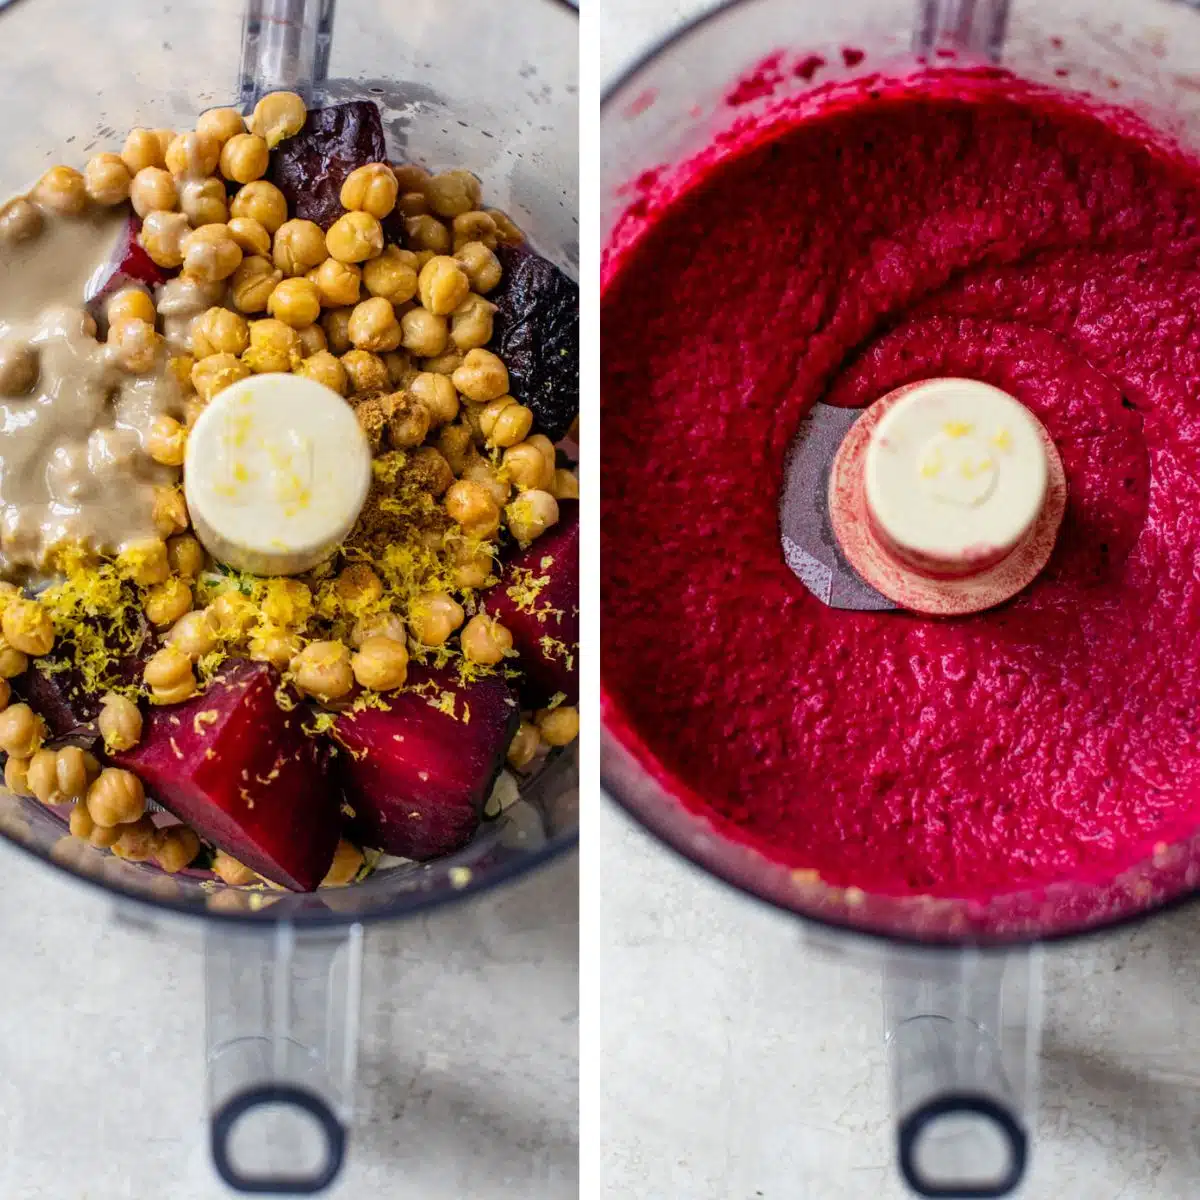 2 images: the left image shows all beet hummus ingredients added to a food processor and the right image shows those ingredients blended